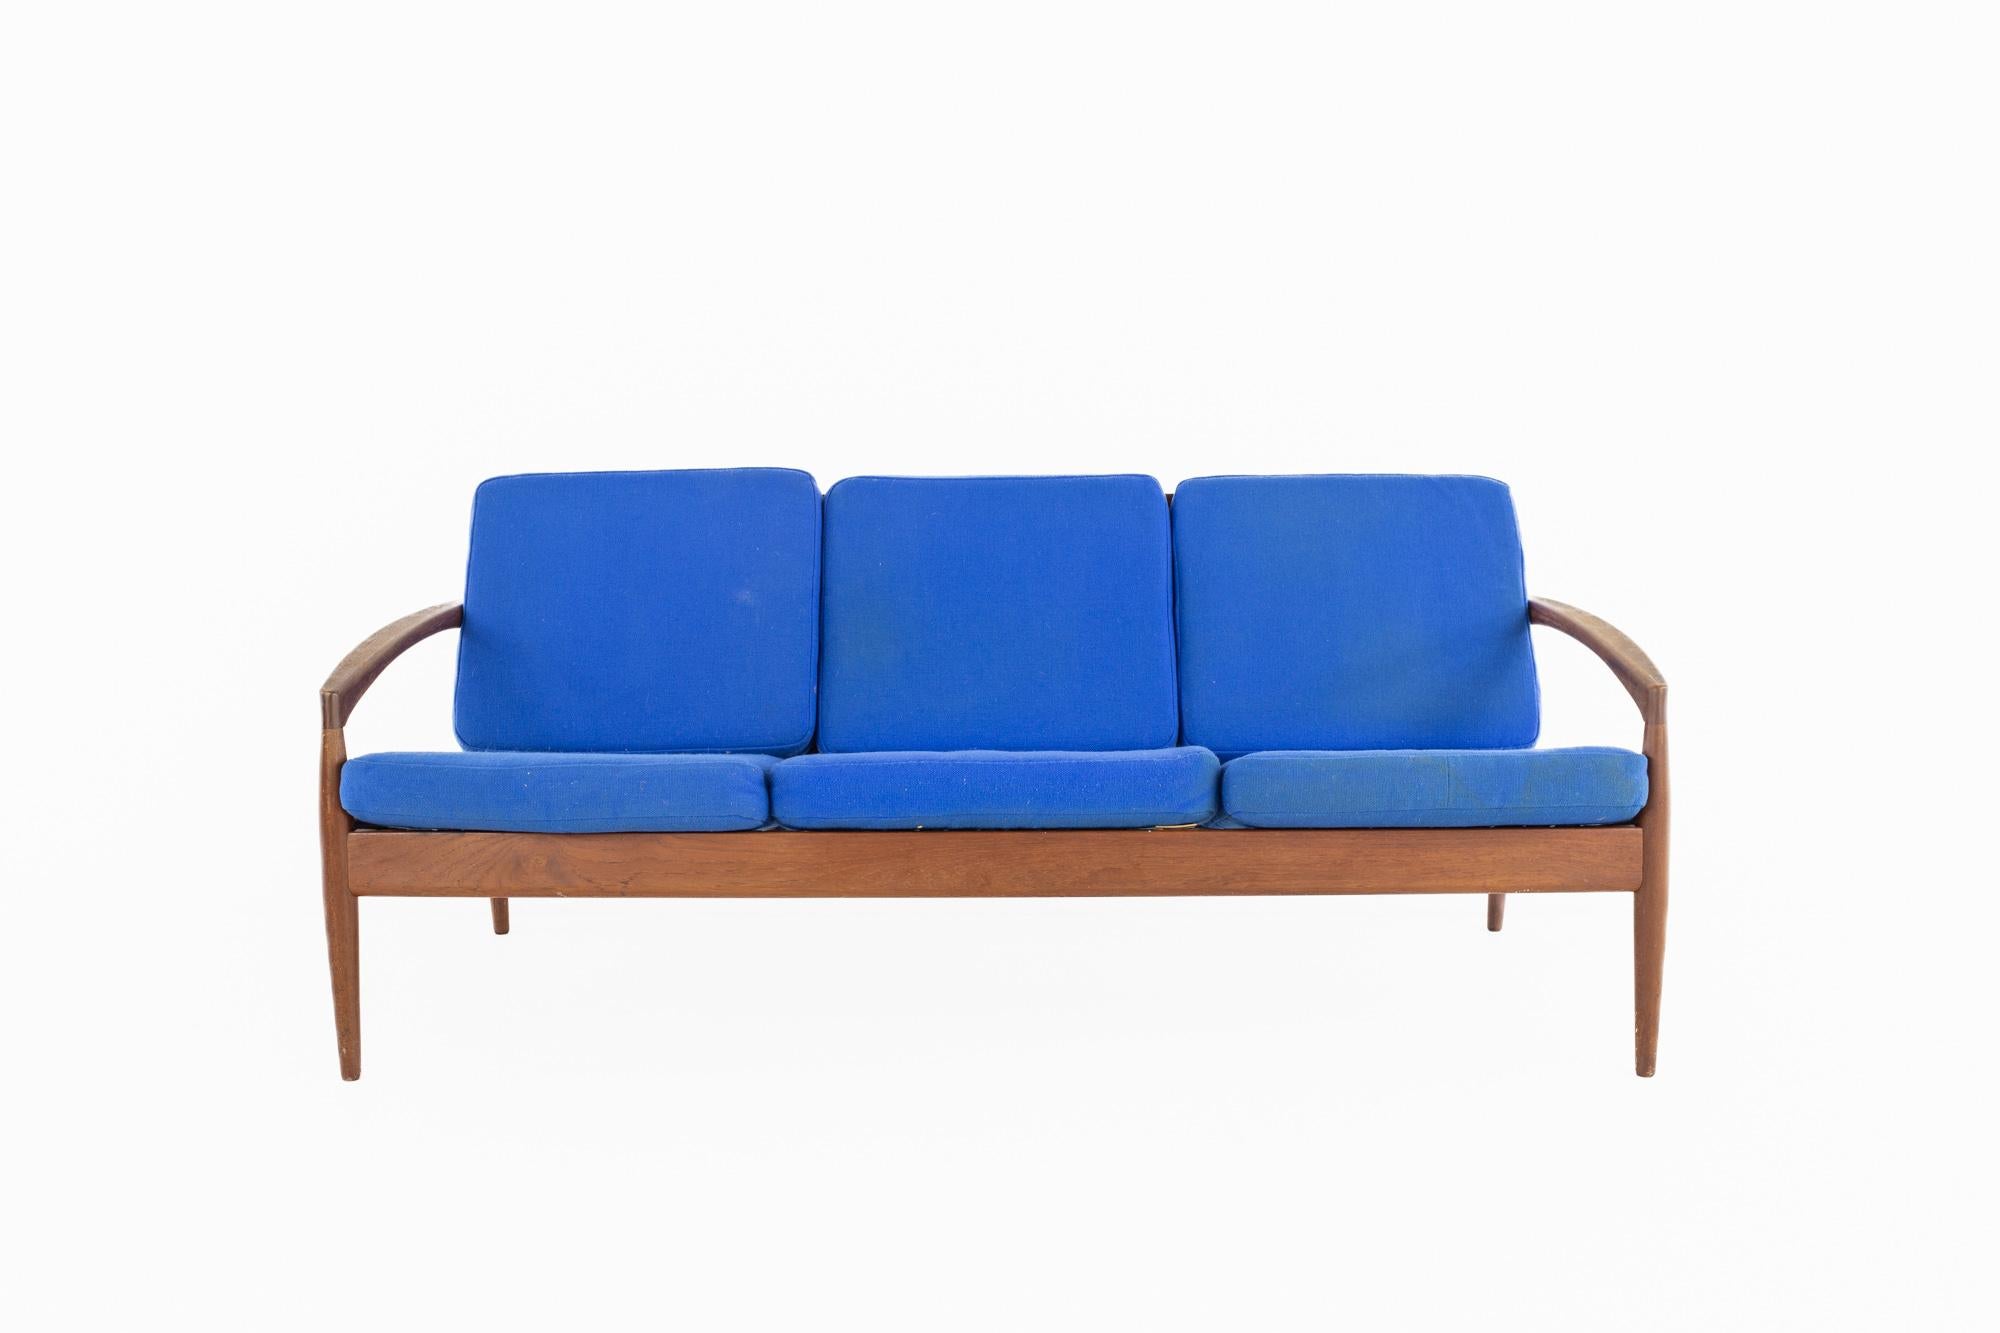 Kai Kristiansen for Magnus Olesen mid century No 121 Paper Knife Teak Sofa

The sofa measures: 63 wide x 21 deep x 27 high, with a seat height of 16 inches

All pieces of furniture can be had in what we call restored vintage condition. That